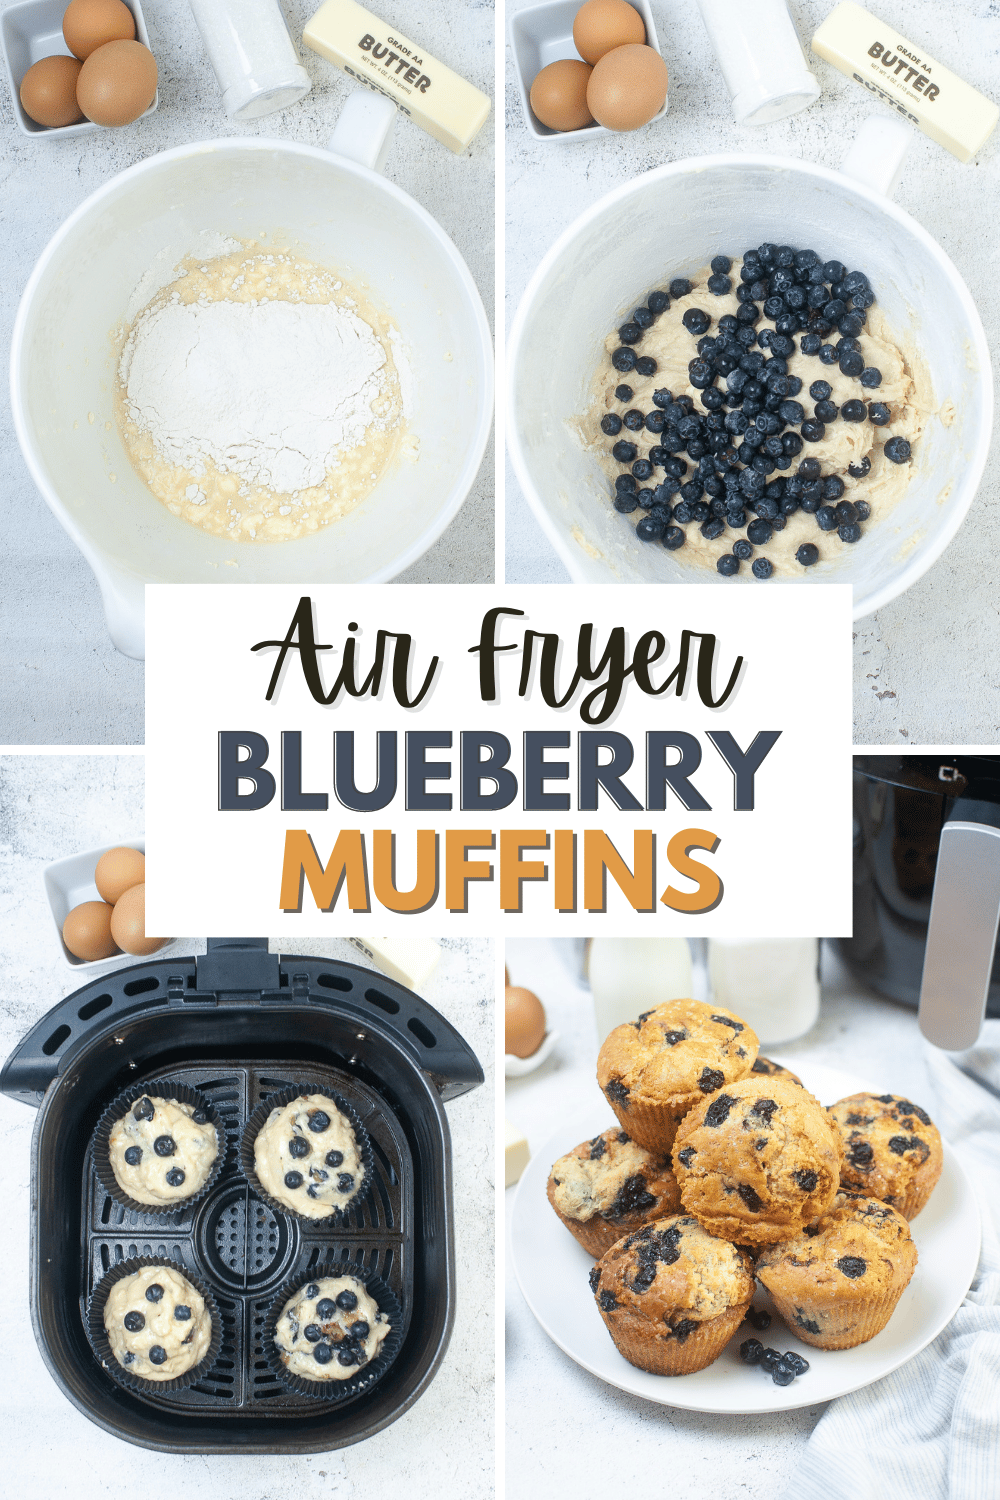 These Air Fryer Blueberry Muffins are tender muffins, filled to the brim with sweet blueberry flavor. There is no better way to start your day! #airfryerblueberrymuffins #airfryer #blueberrymuffins #muffins #breakfast via @wondermomwannab